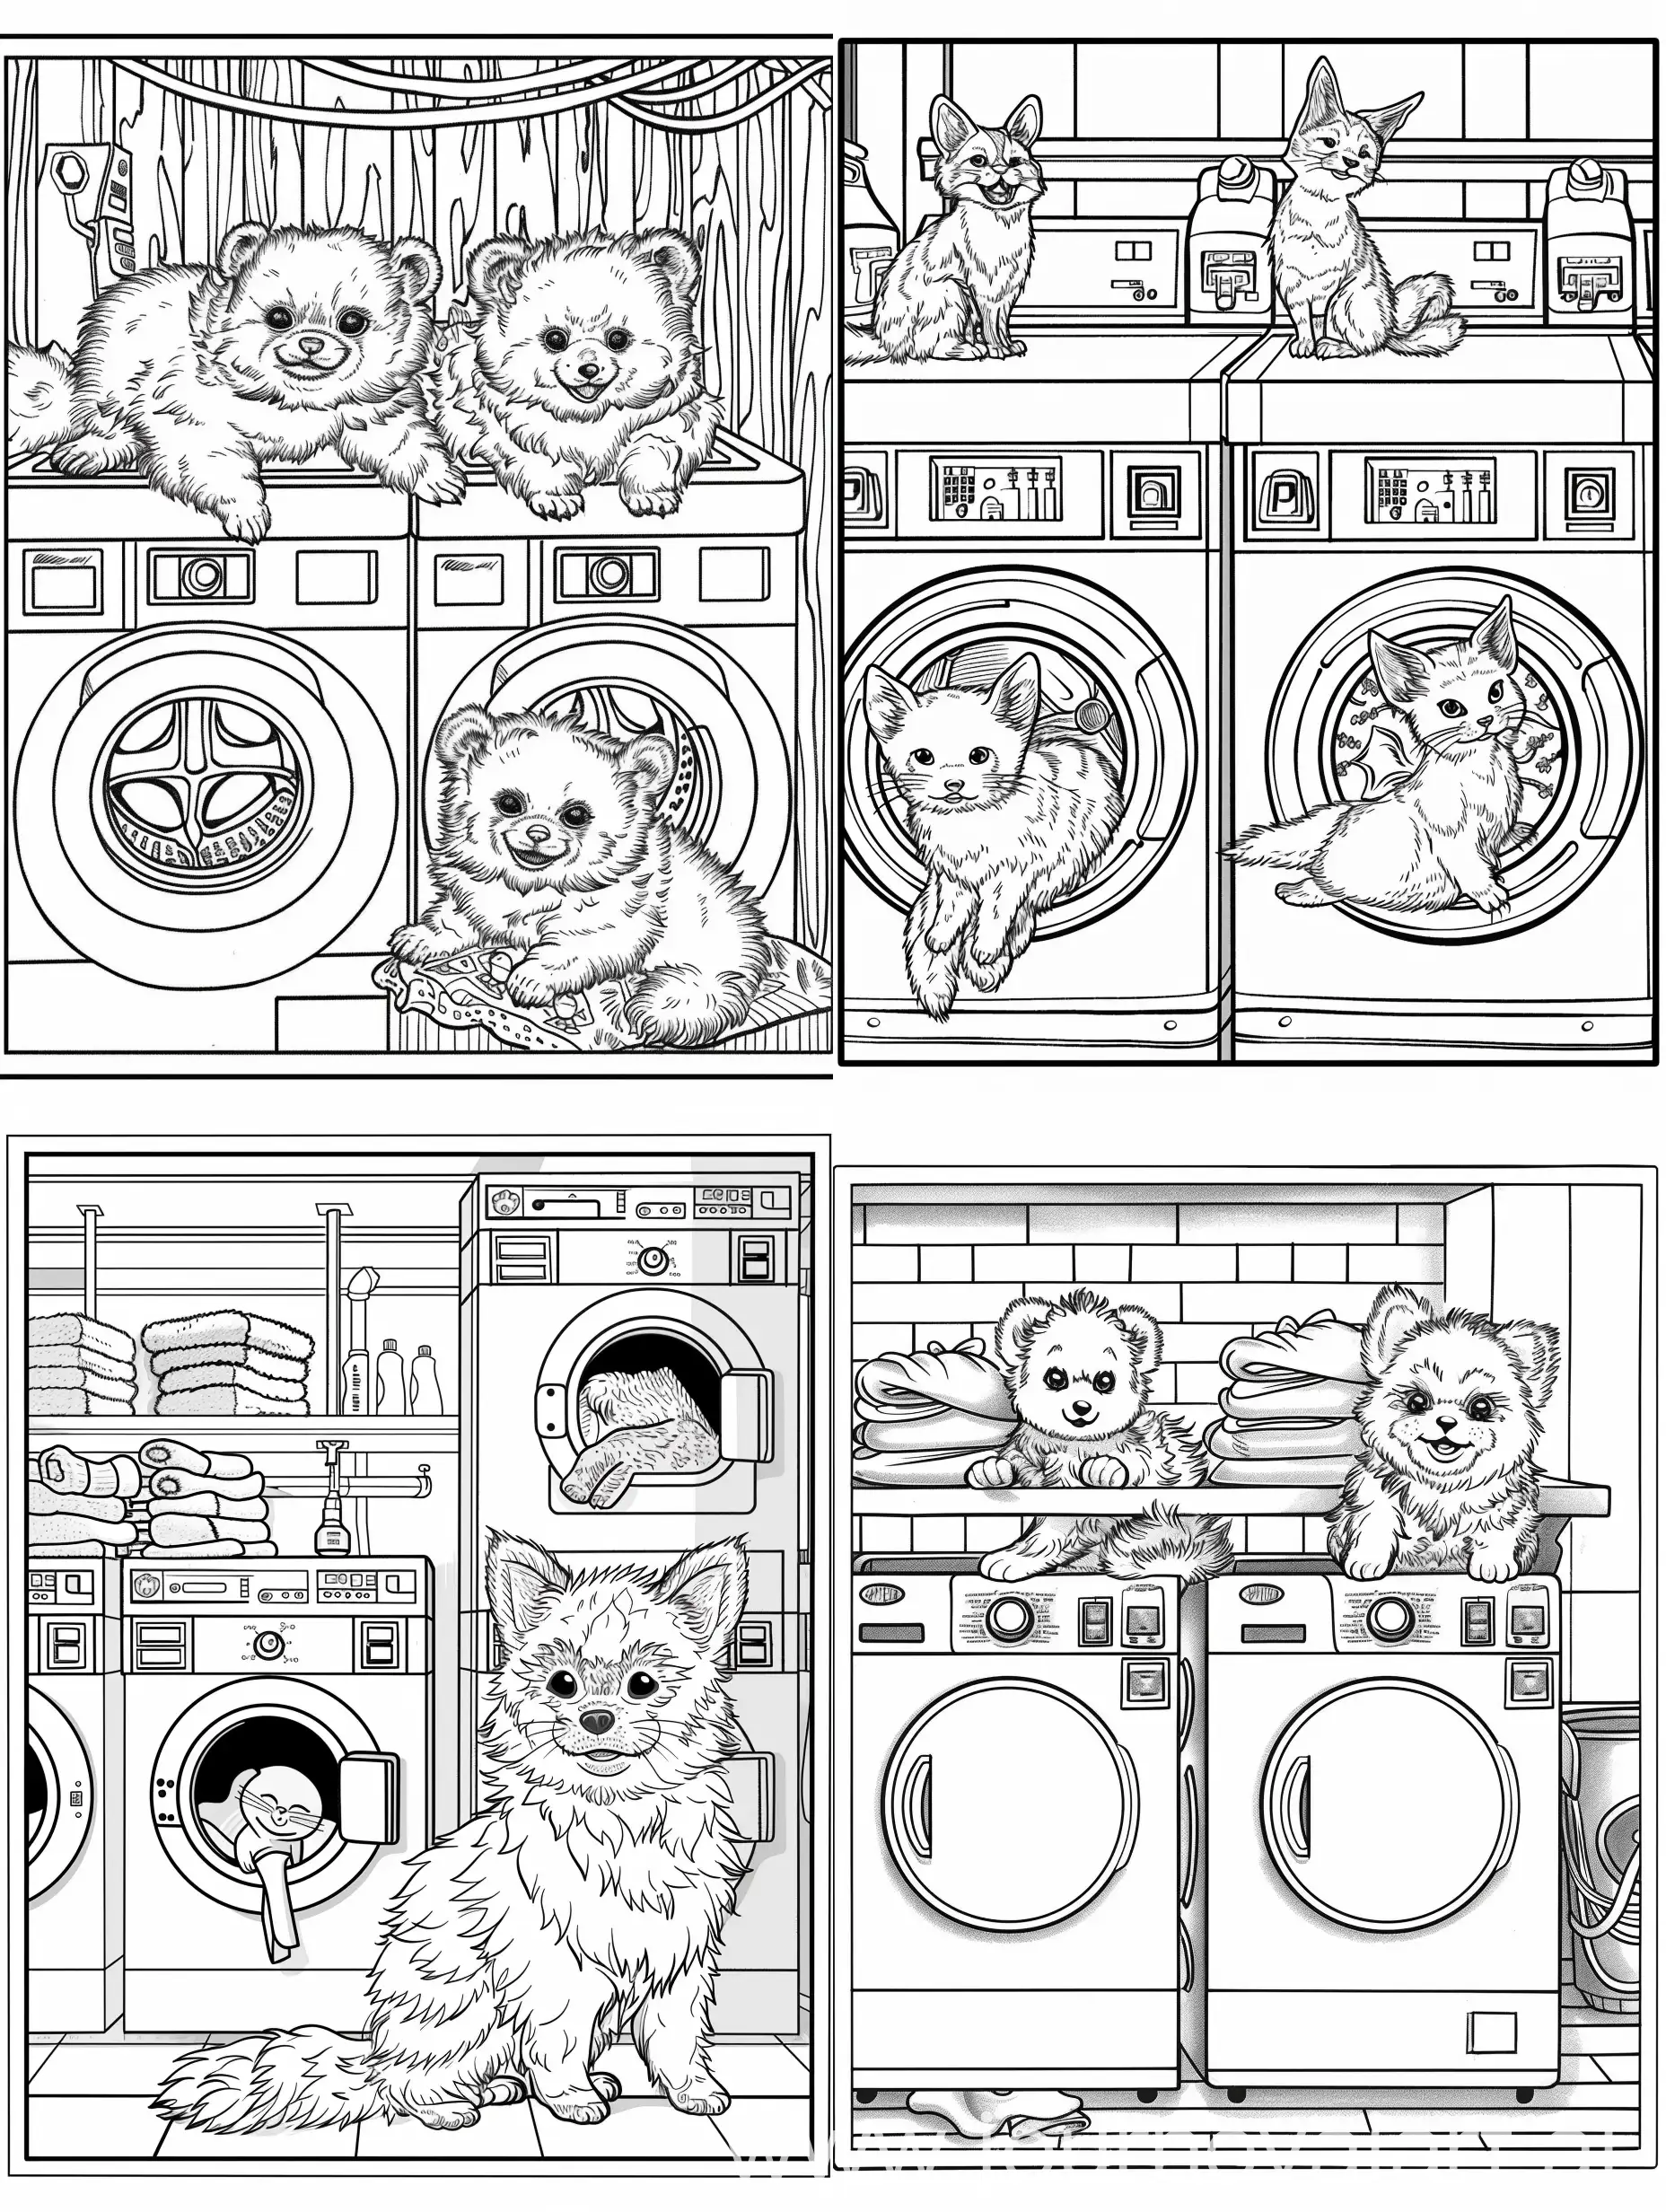 Coloring book page for cute fuzzy animals in a laundromat setting, simple, no shading color